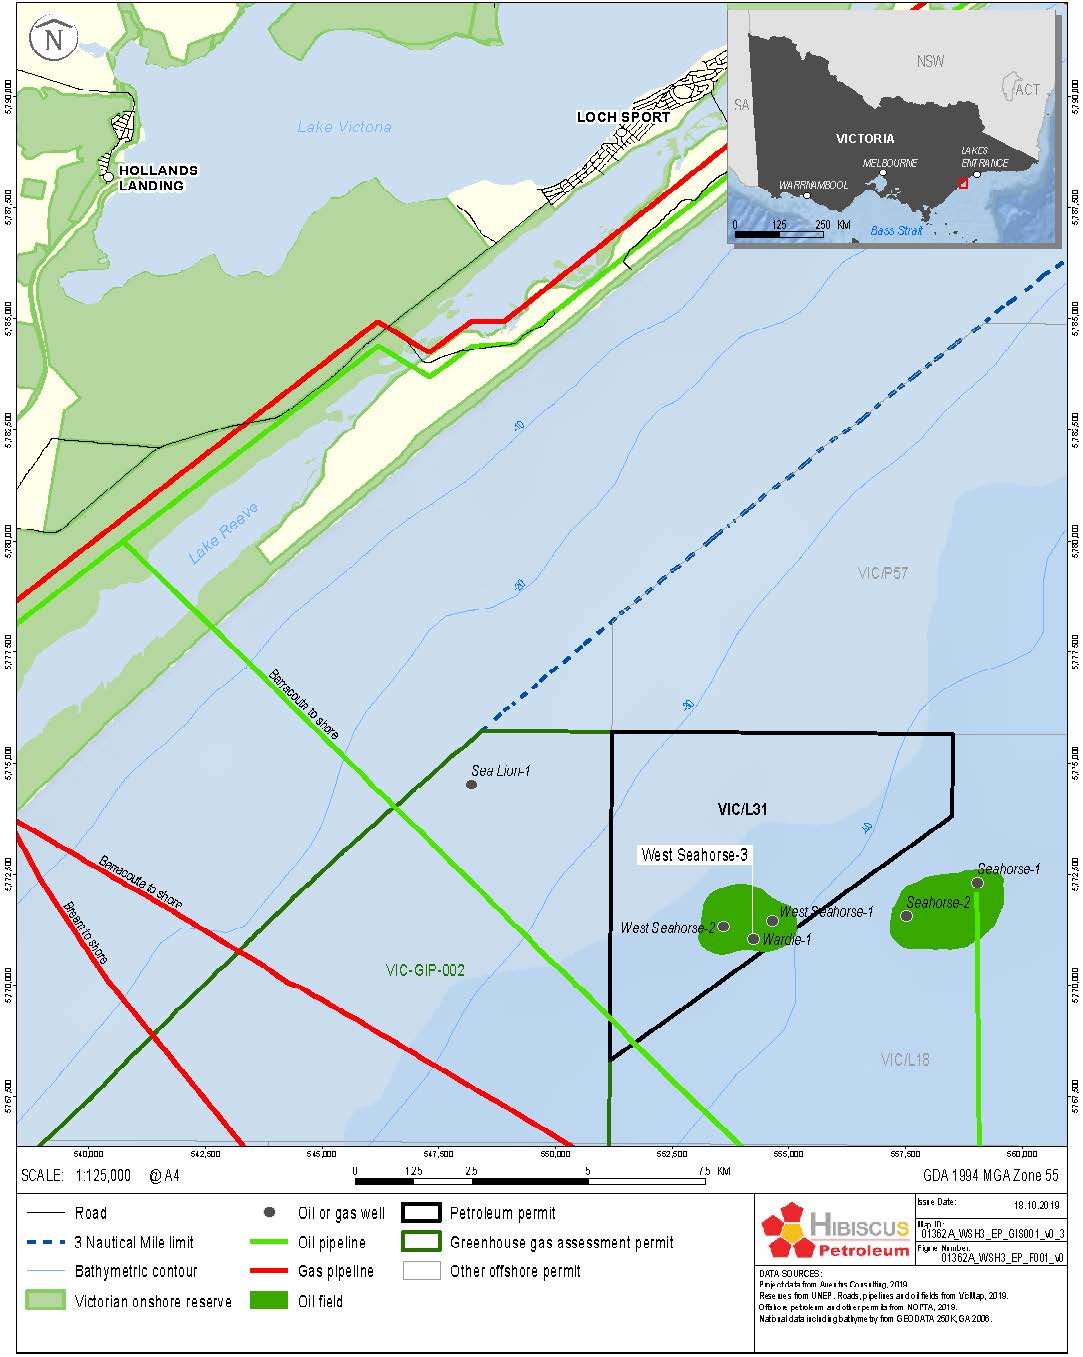 Location map - Activity: West Seahorse-3/Wardie-1 Non Production Operations (refer to description)